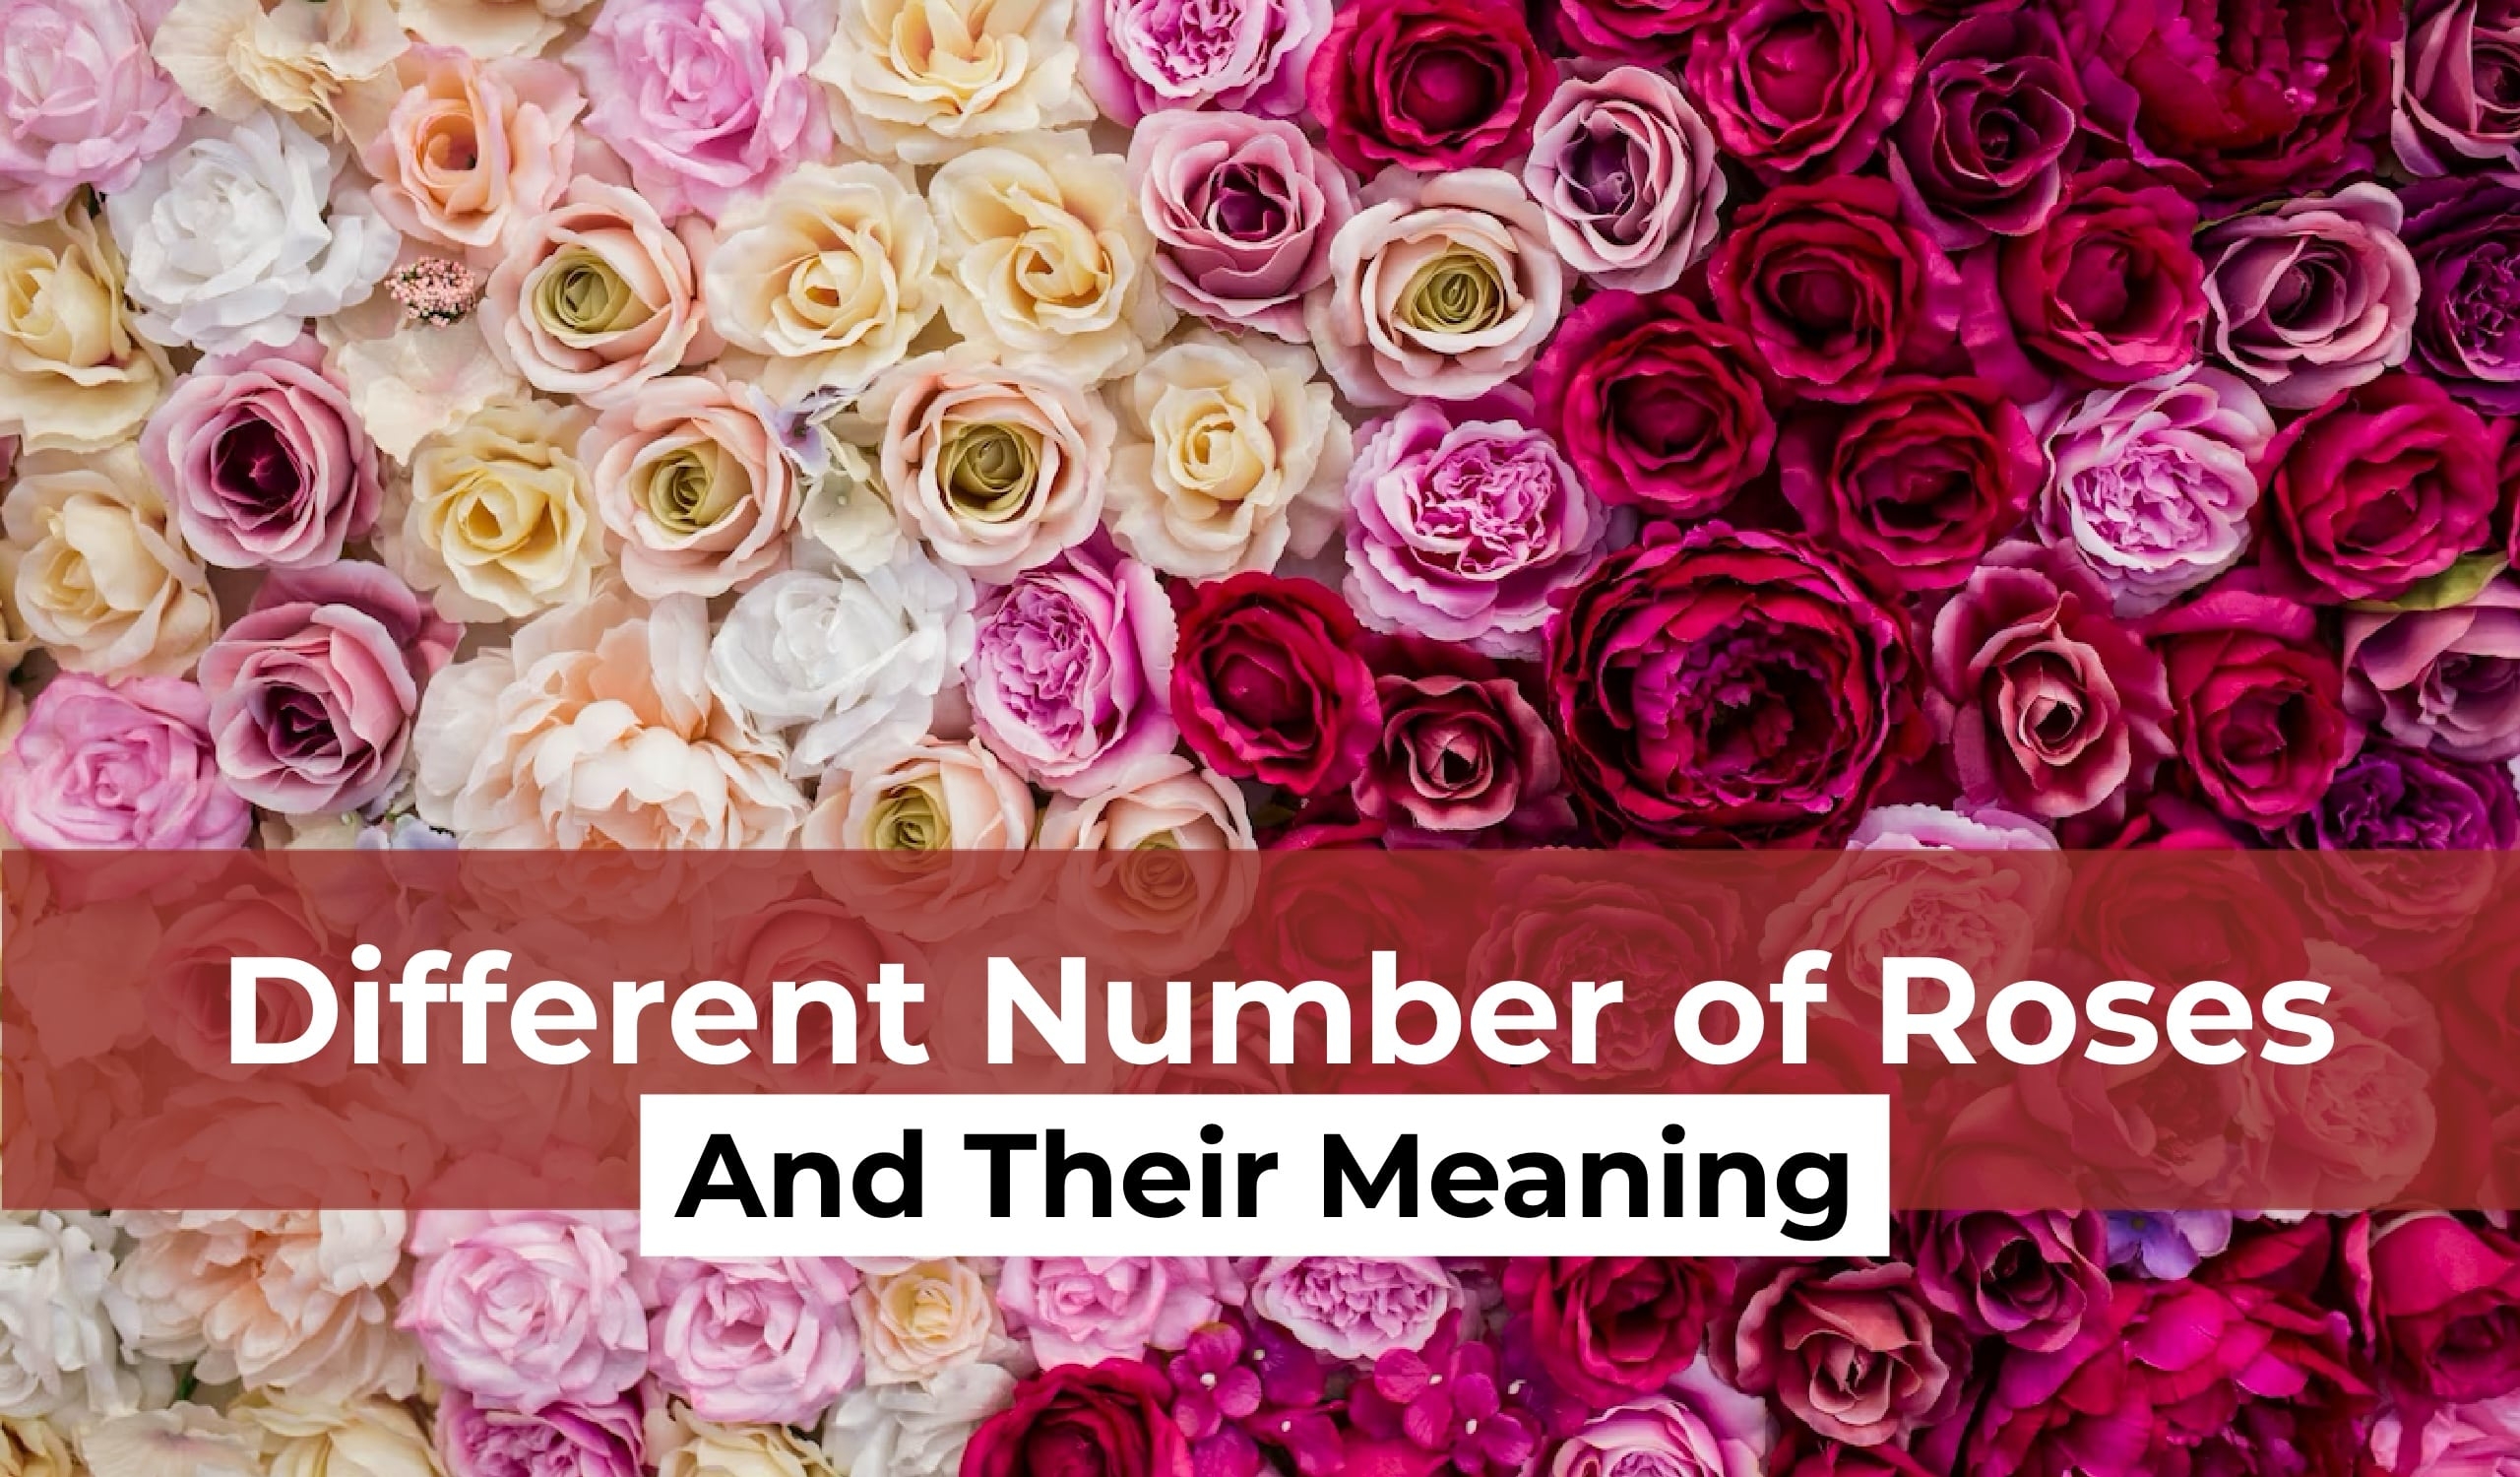 Different Number of Roses and Their Meaning